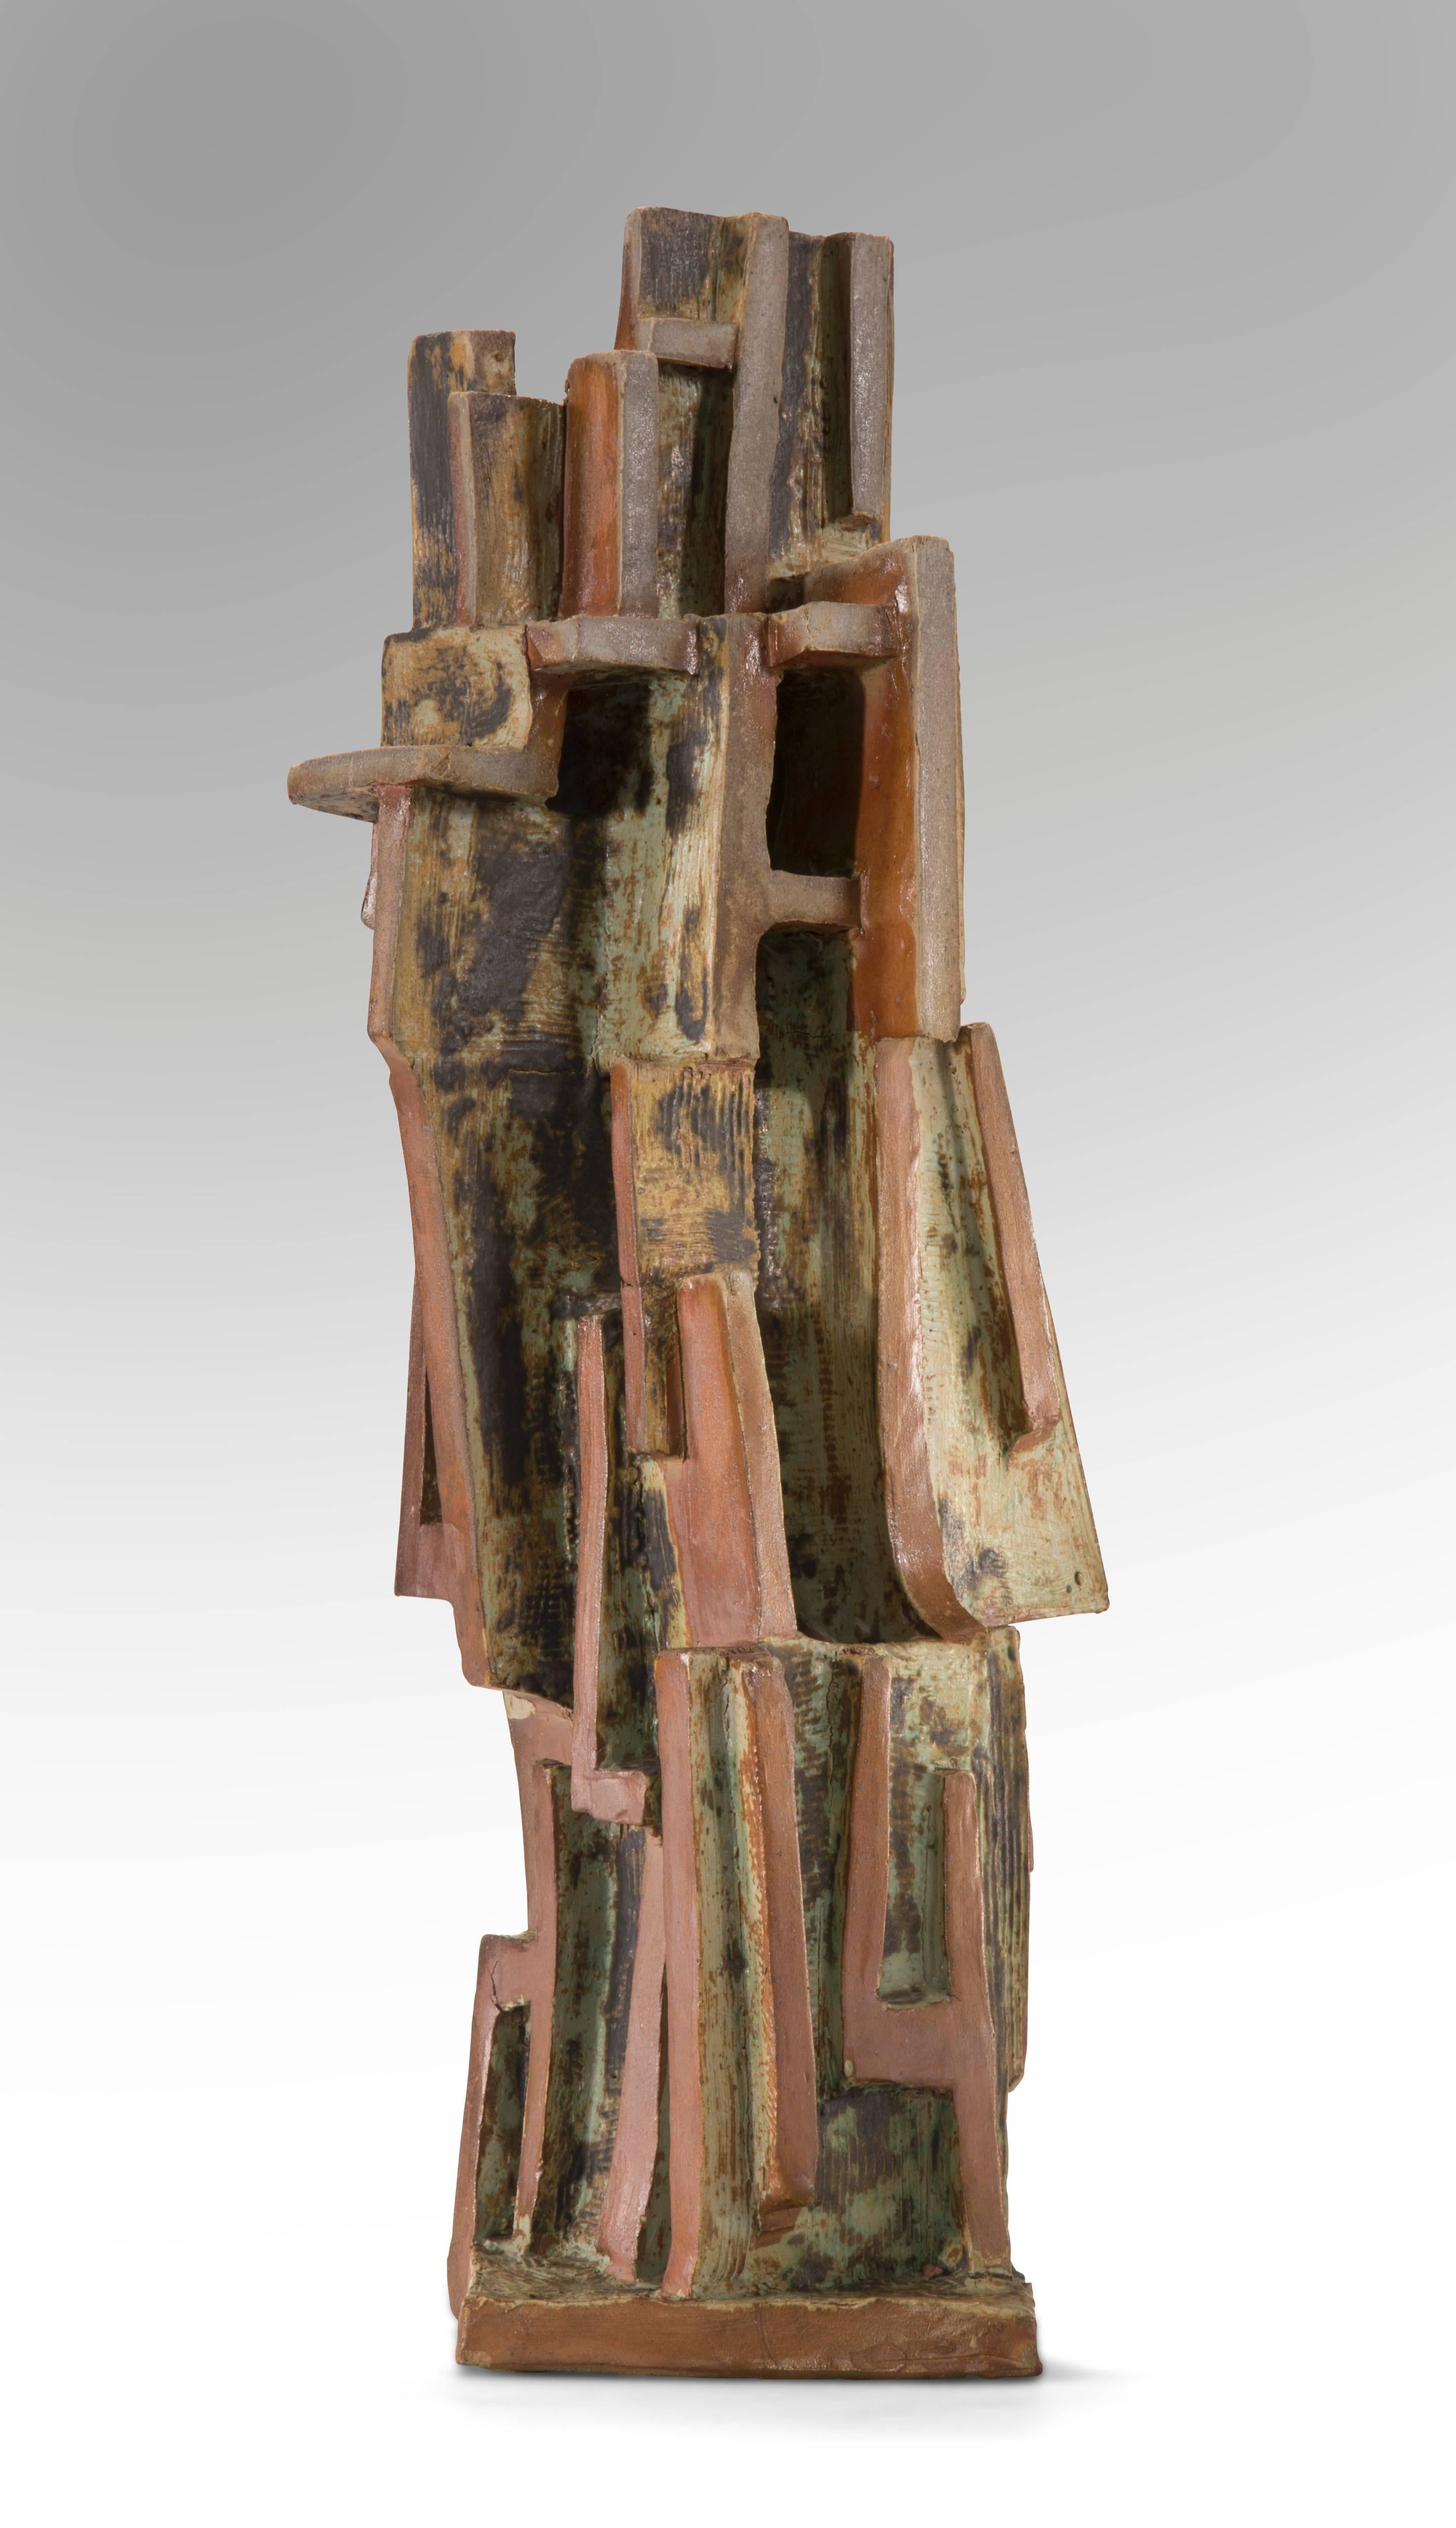 A boldly expressive sculpture in a signature style with a handsome combination of glazed and unglazed ceramic, Mid 20th Century.
Incised signature: V. Ivanoff   Inscribed: VA 1259